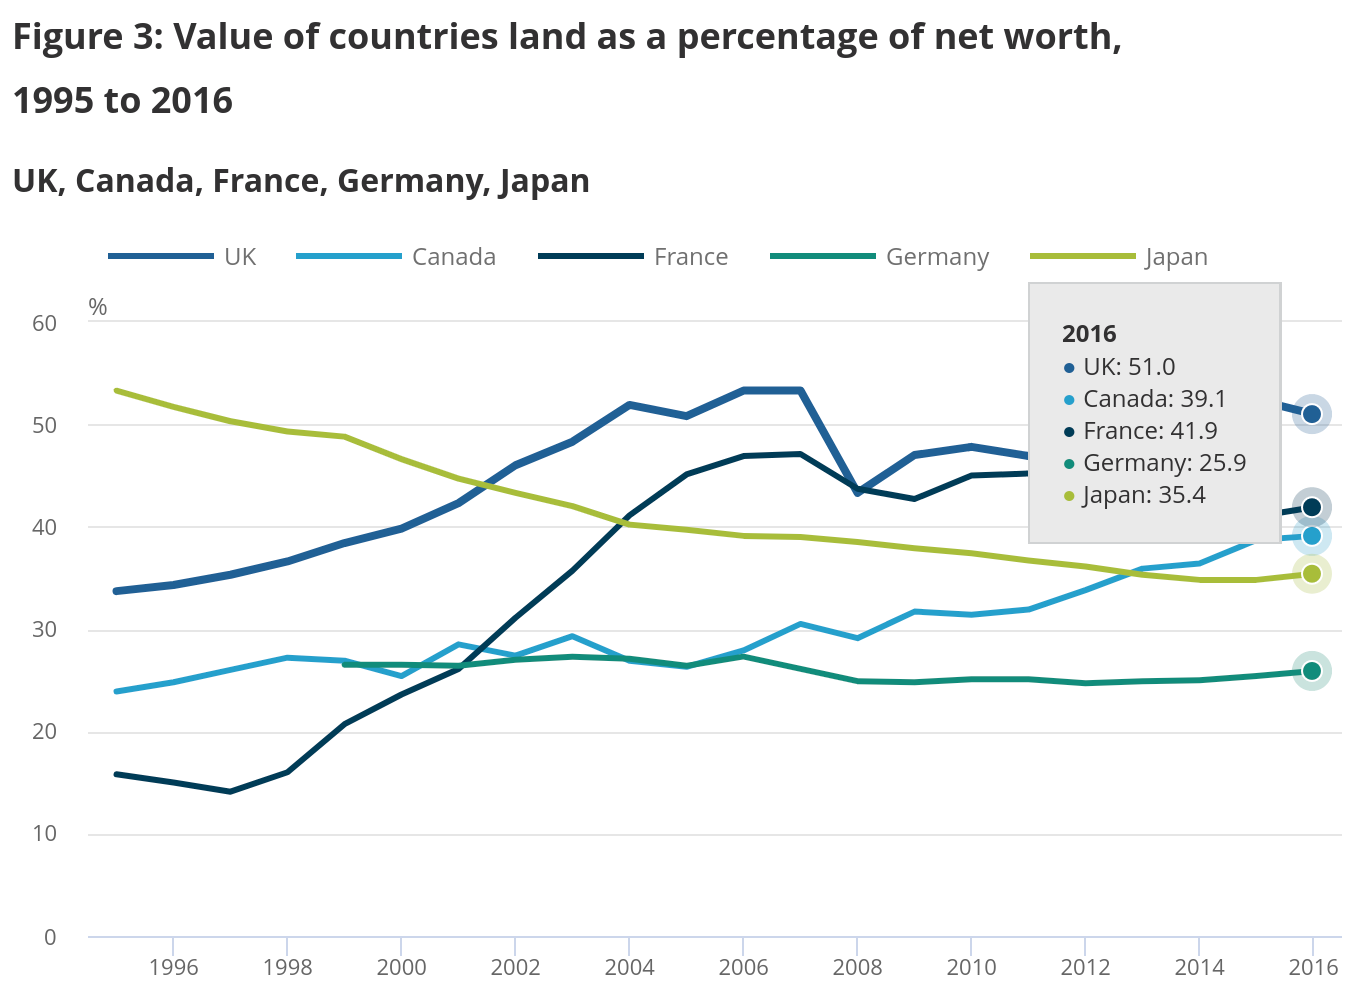 Land value as a share of G7 countries net worth